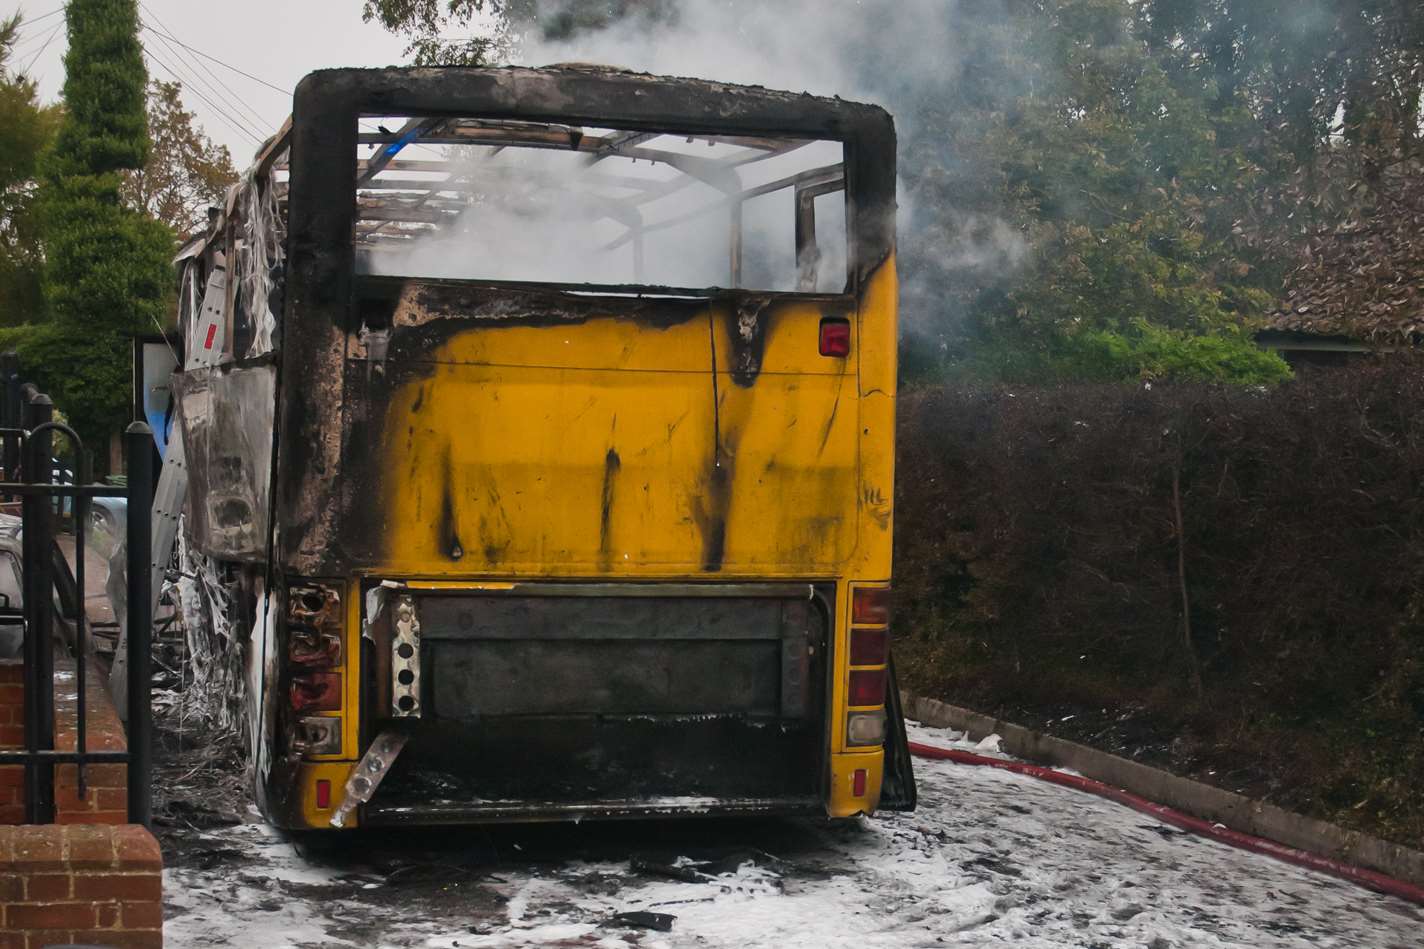 The coach was covered in foam as firefighters battled the blaze. Picture: Andy Flood